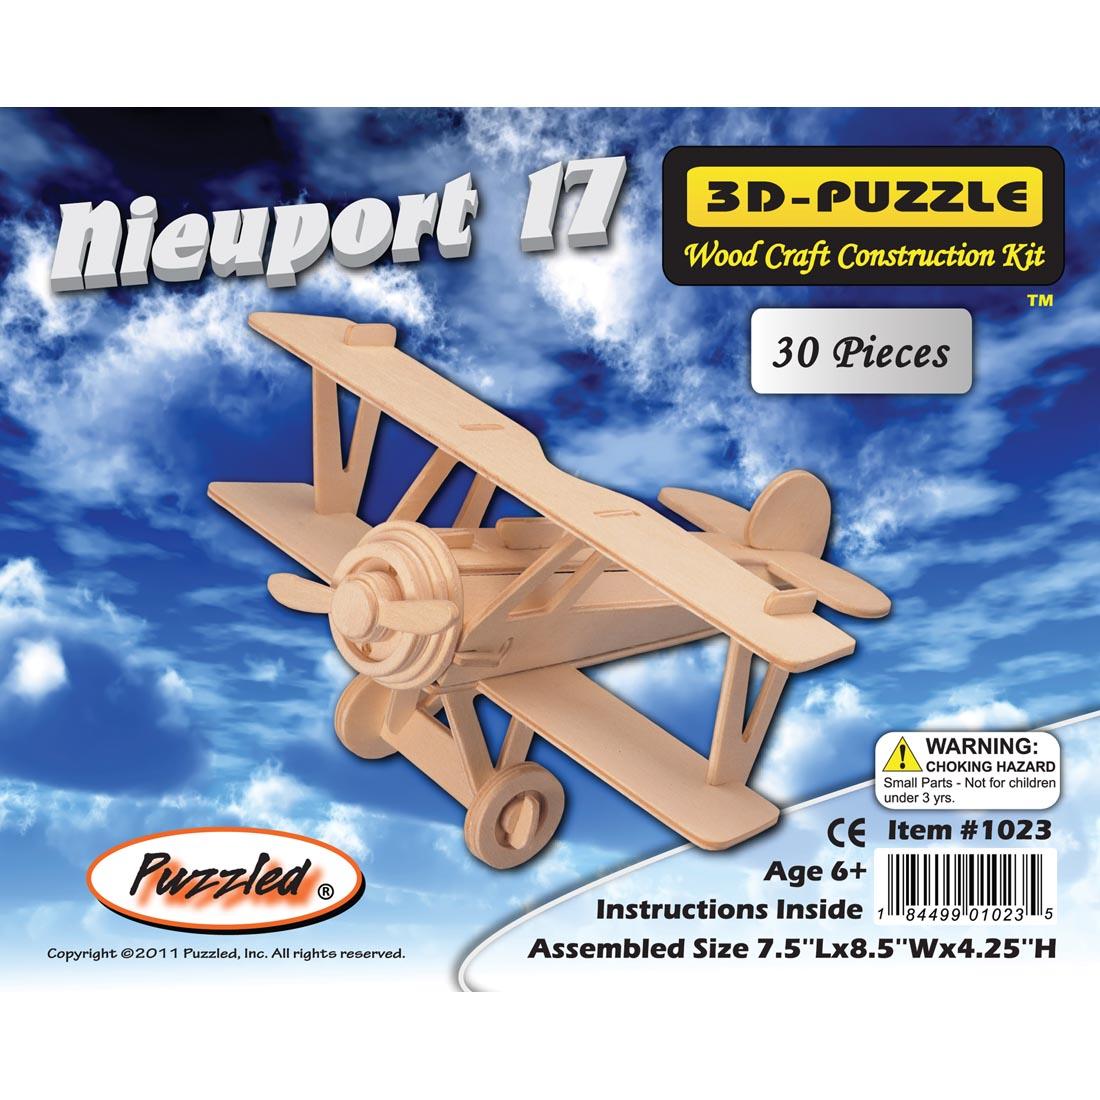 Neiuport 17 Airplane 3D Wooden Puzzle